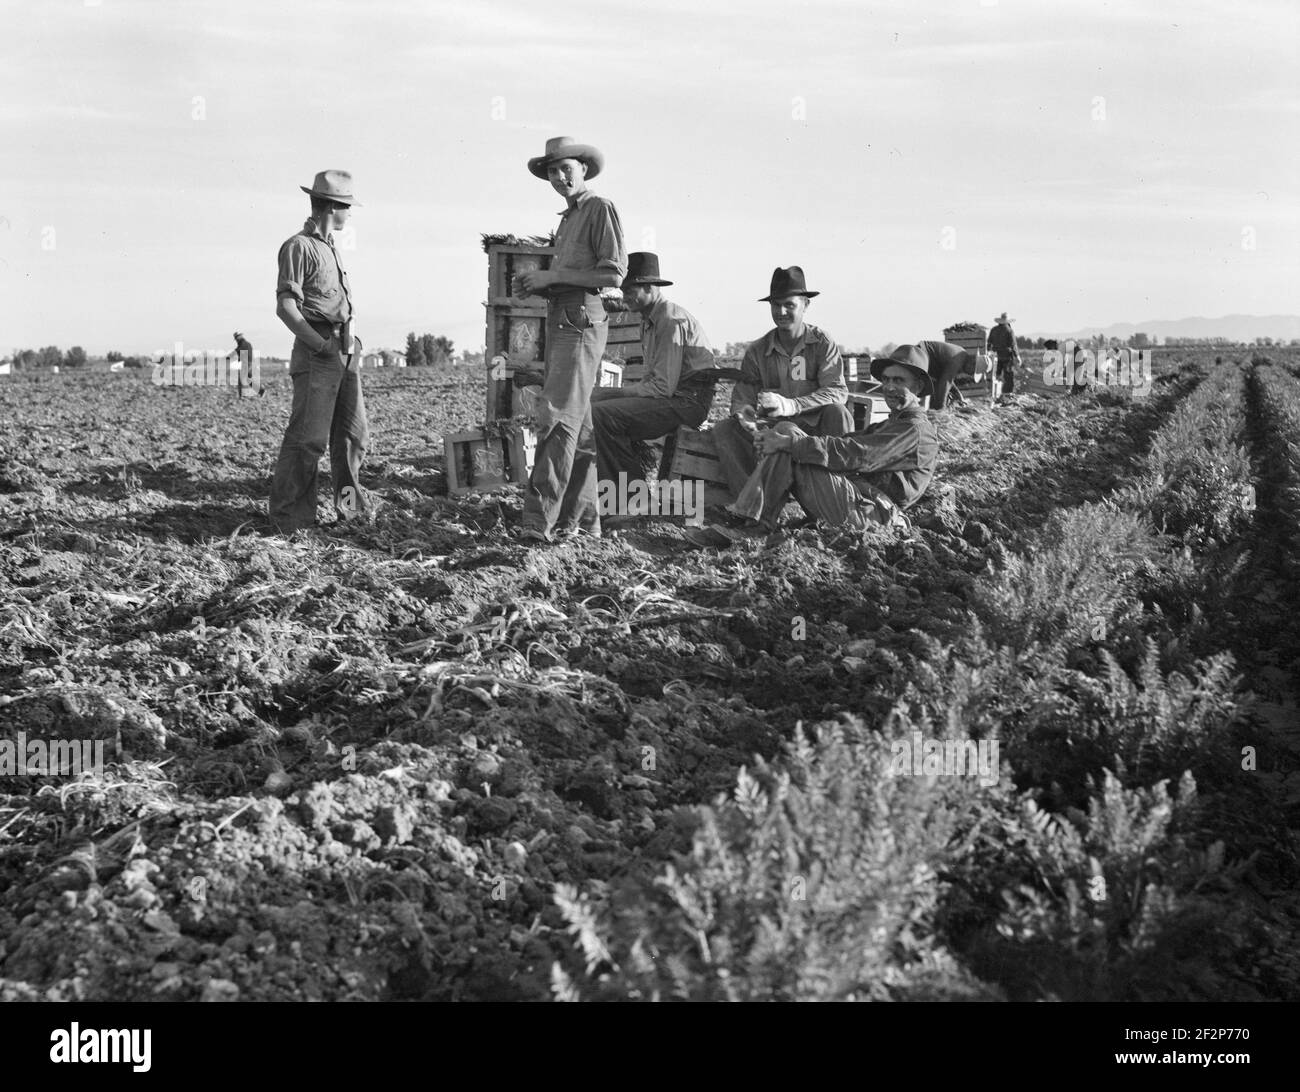 Large-scale agricultural gang labor, Mexicans and whites from the Southwest pull, clean, tie and crate carrots for the eastern market for eleven cents per crate of forty-eight bunches. Many can make barely one dollar a day. Heavy oversupply of labor and competition for jobs is keen. Near Meloland, Imperial Valley. February 1939. . Photograph by Dorothea Lange. Stock Photo